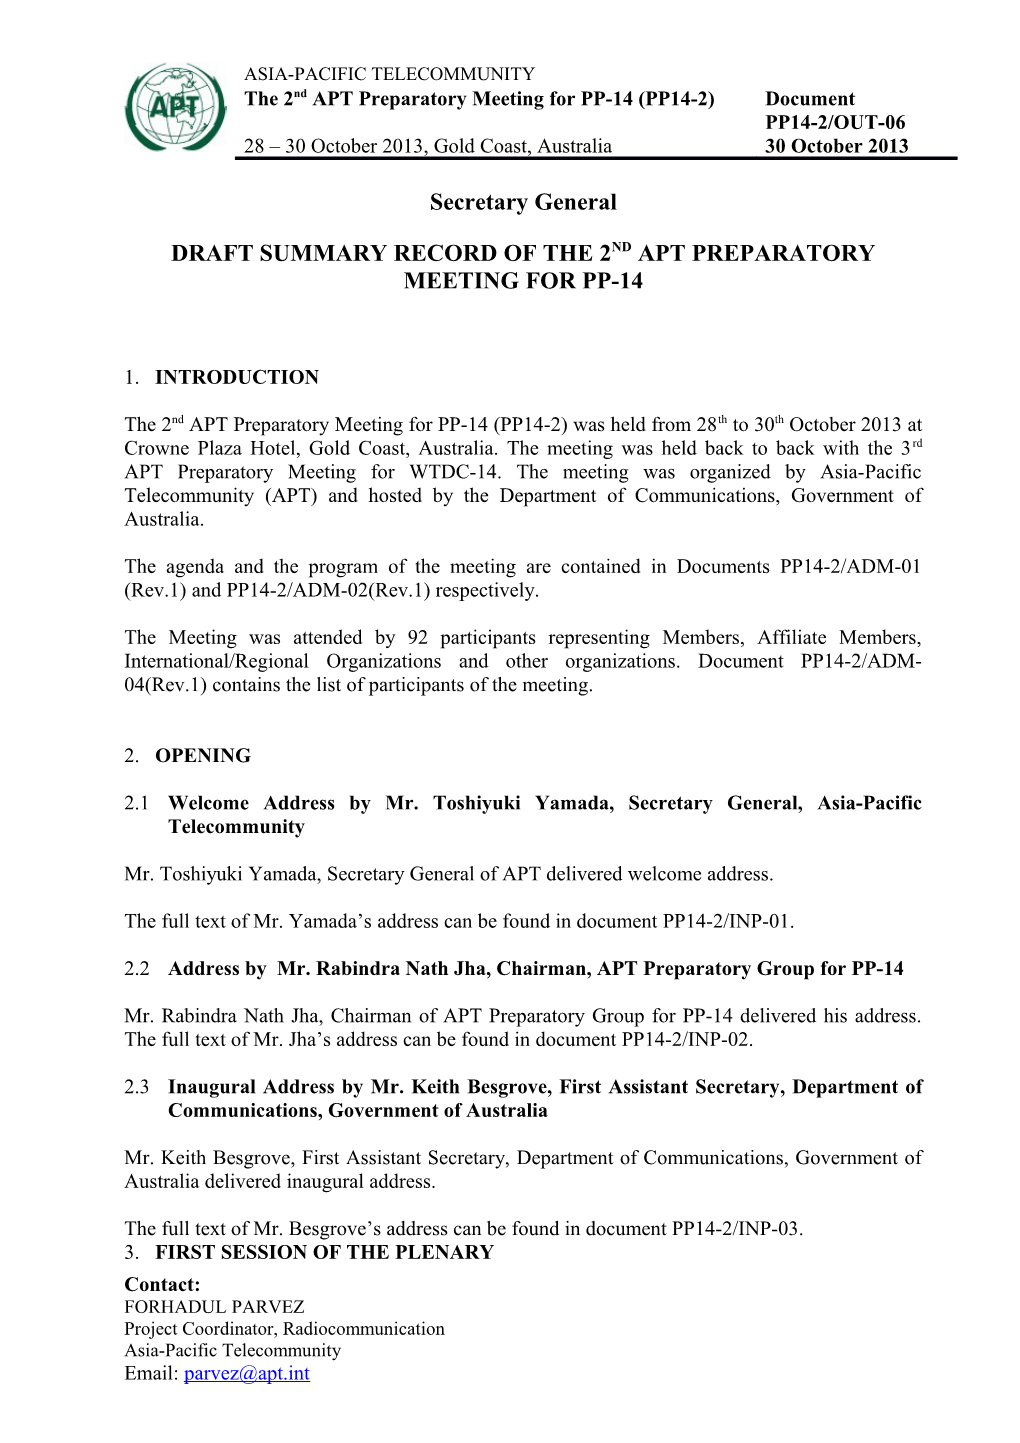 Draft Summary Record of the 2Nd APT Preparatory Meeting for Pp-14